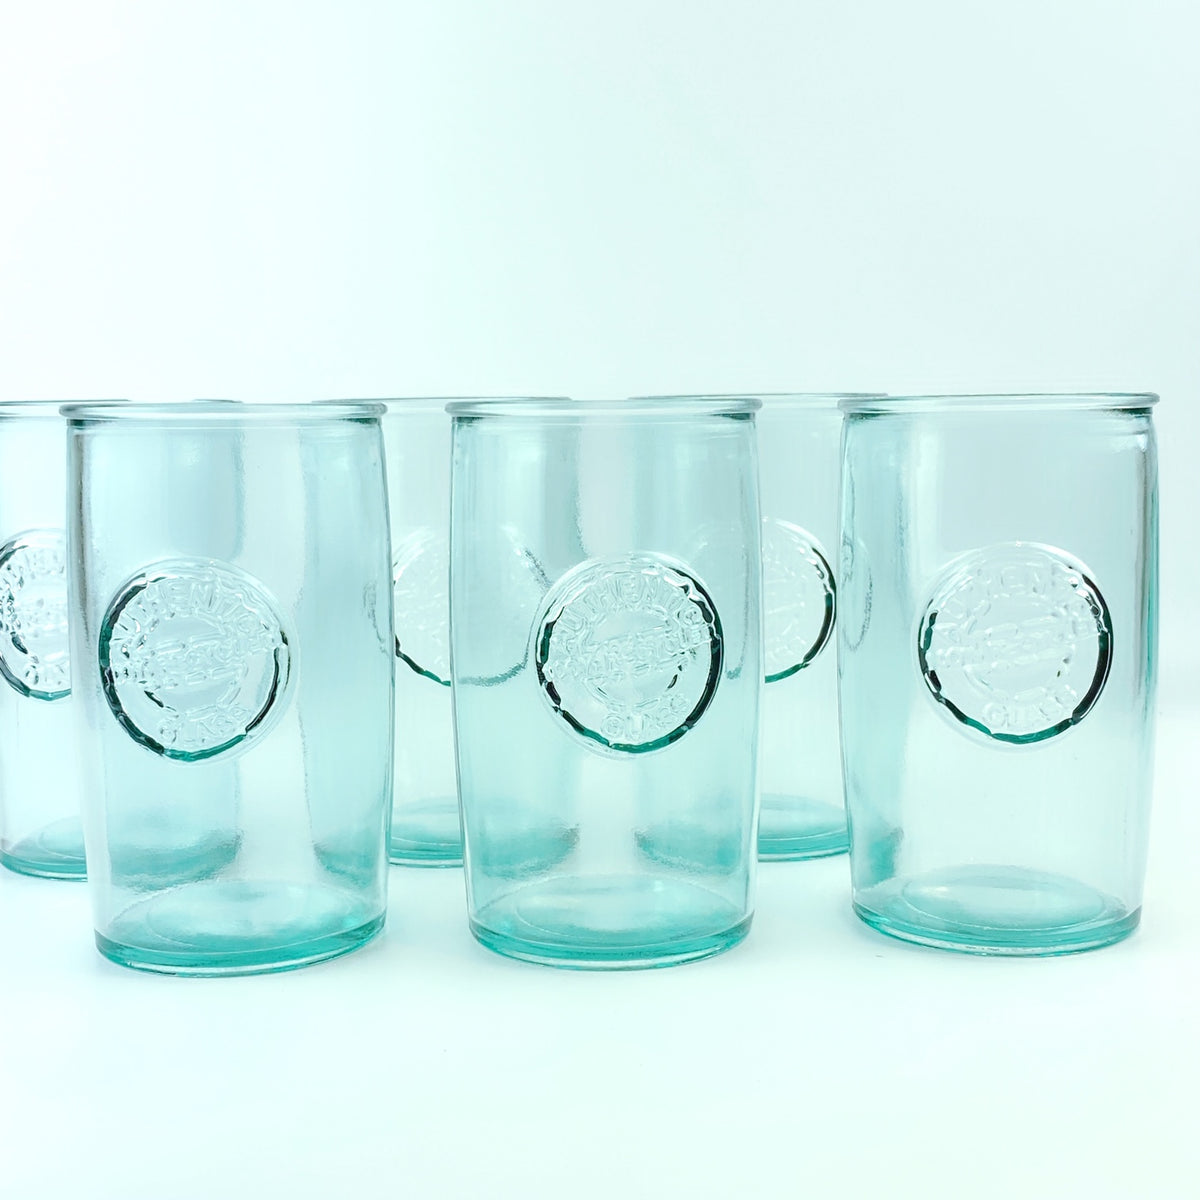 Apasco Recycled Highball Glasses - 13.5 oz., Set of 6 – The Citizenry